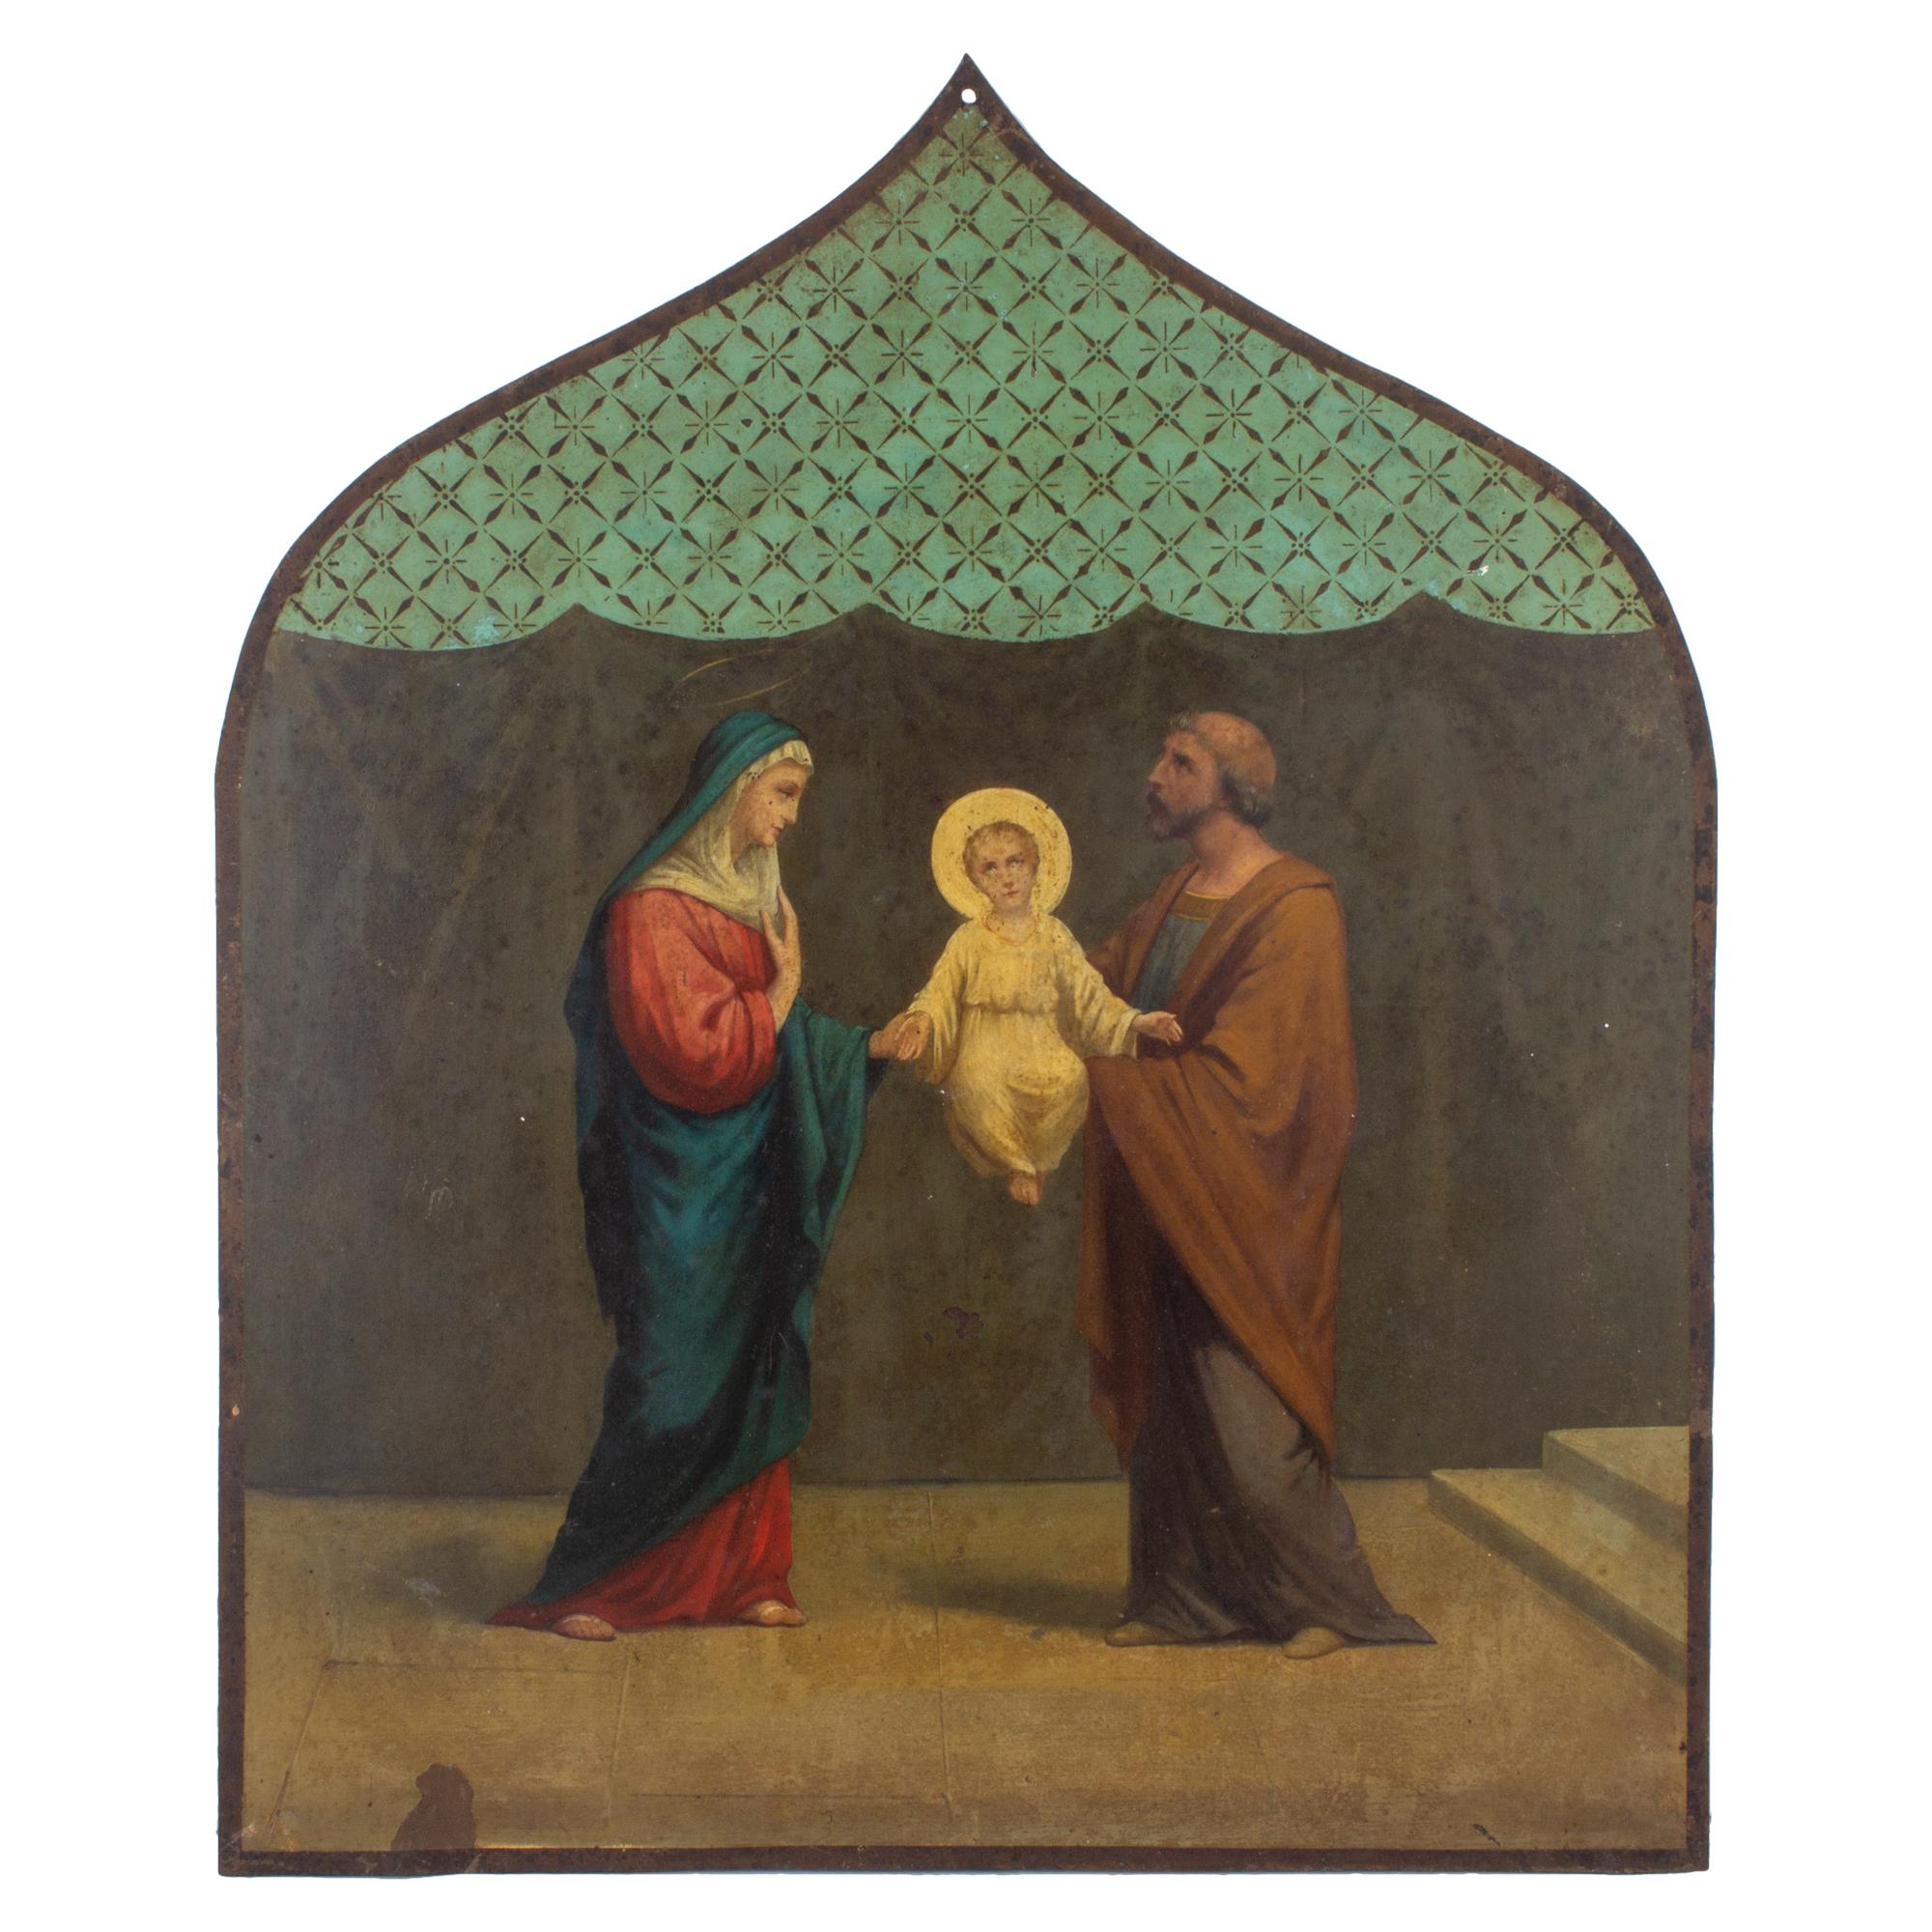 This is a pairing of antique religious paintings on metal found in France. The date is unknown, but likely late 19th century or older. The metal canvas is an inverted shield or badge shape with paint applied to one side. They are identical in size